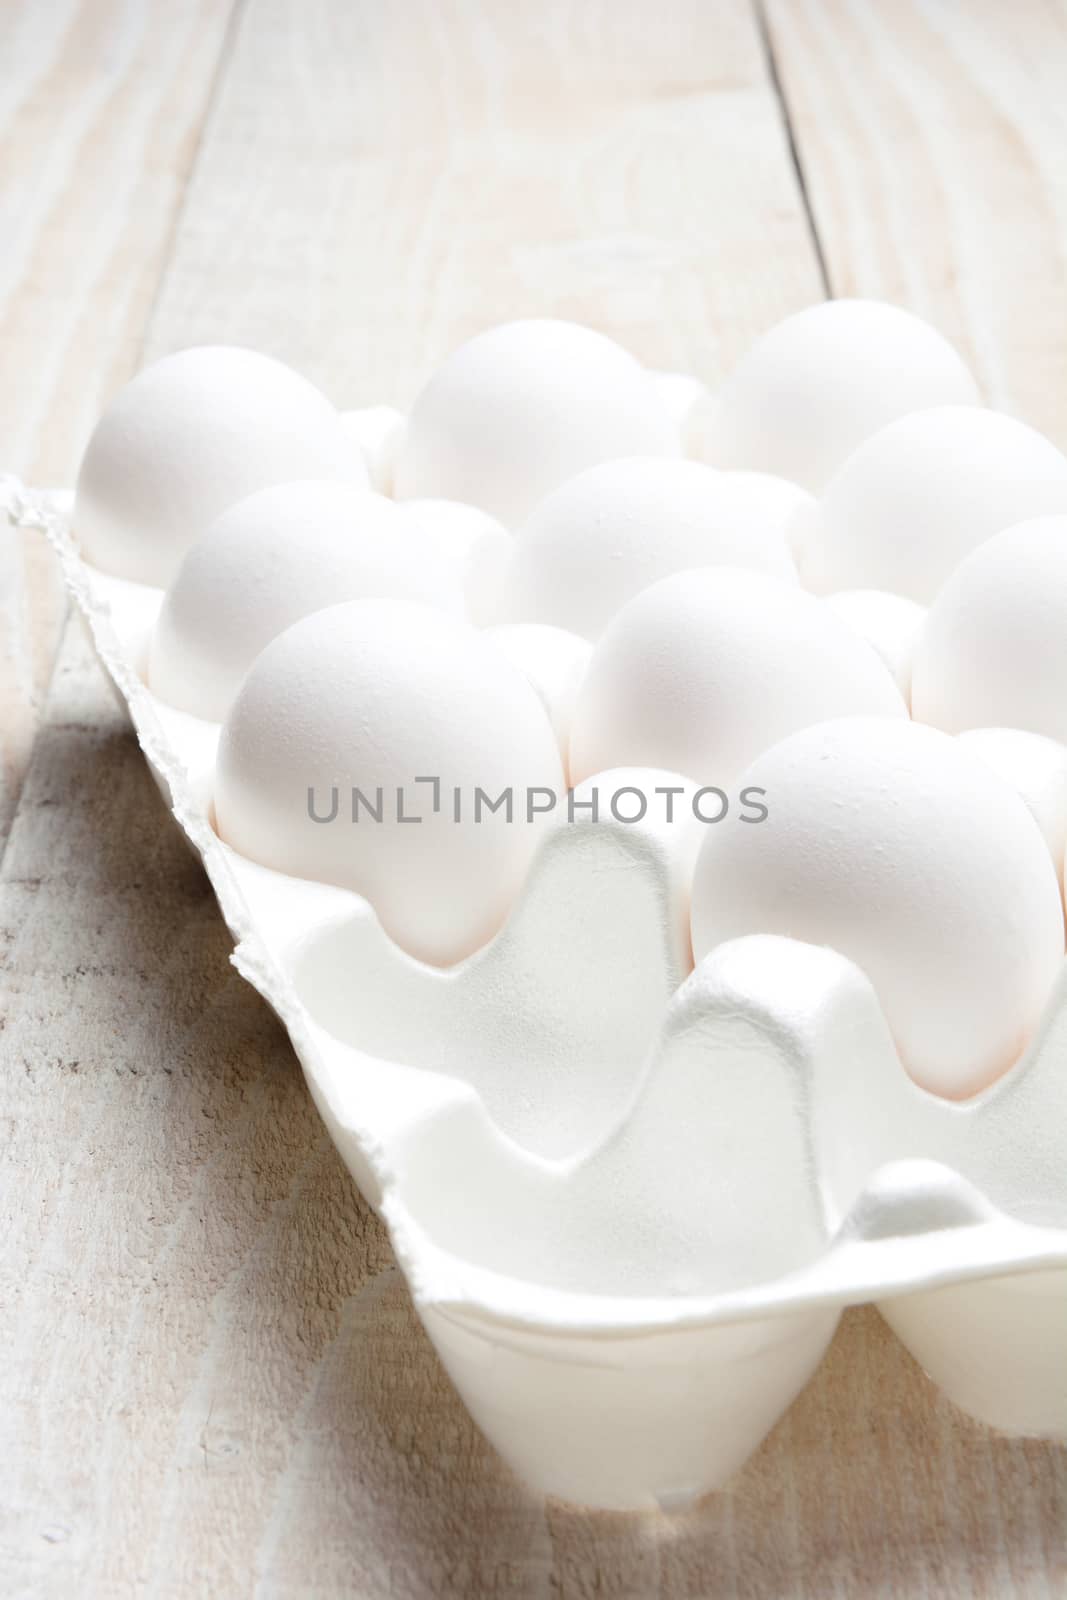 Closeup of a carton of eggs on white rustic wood table. Still life study of white on white.